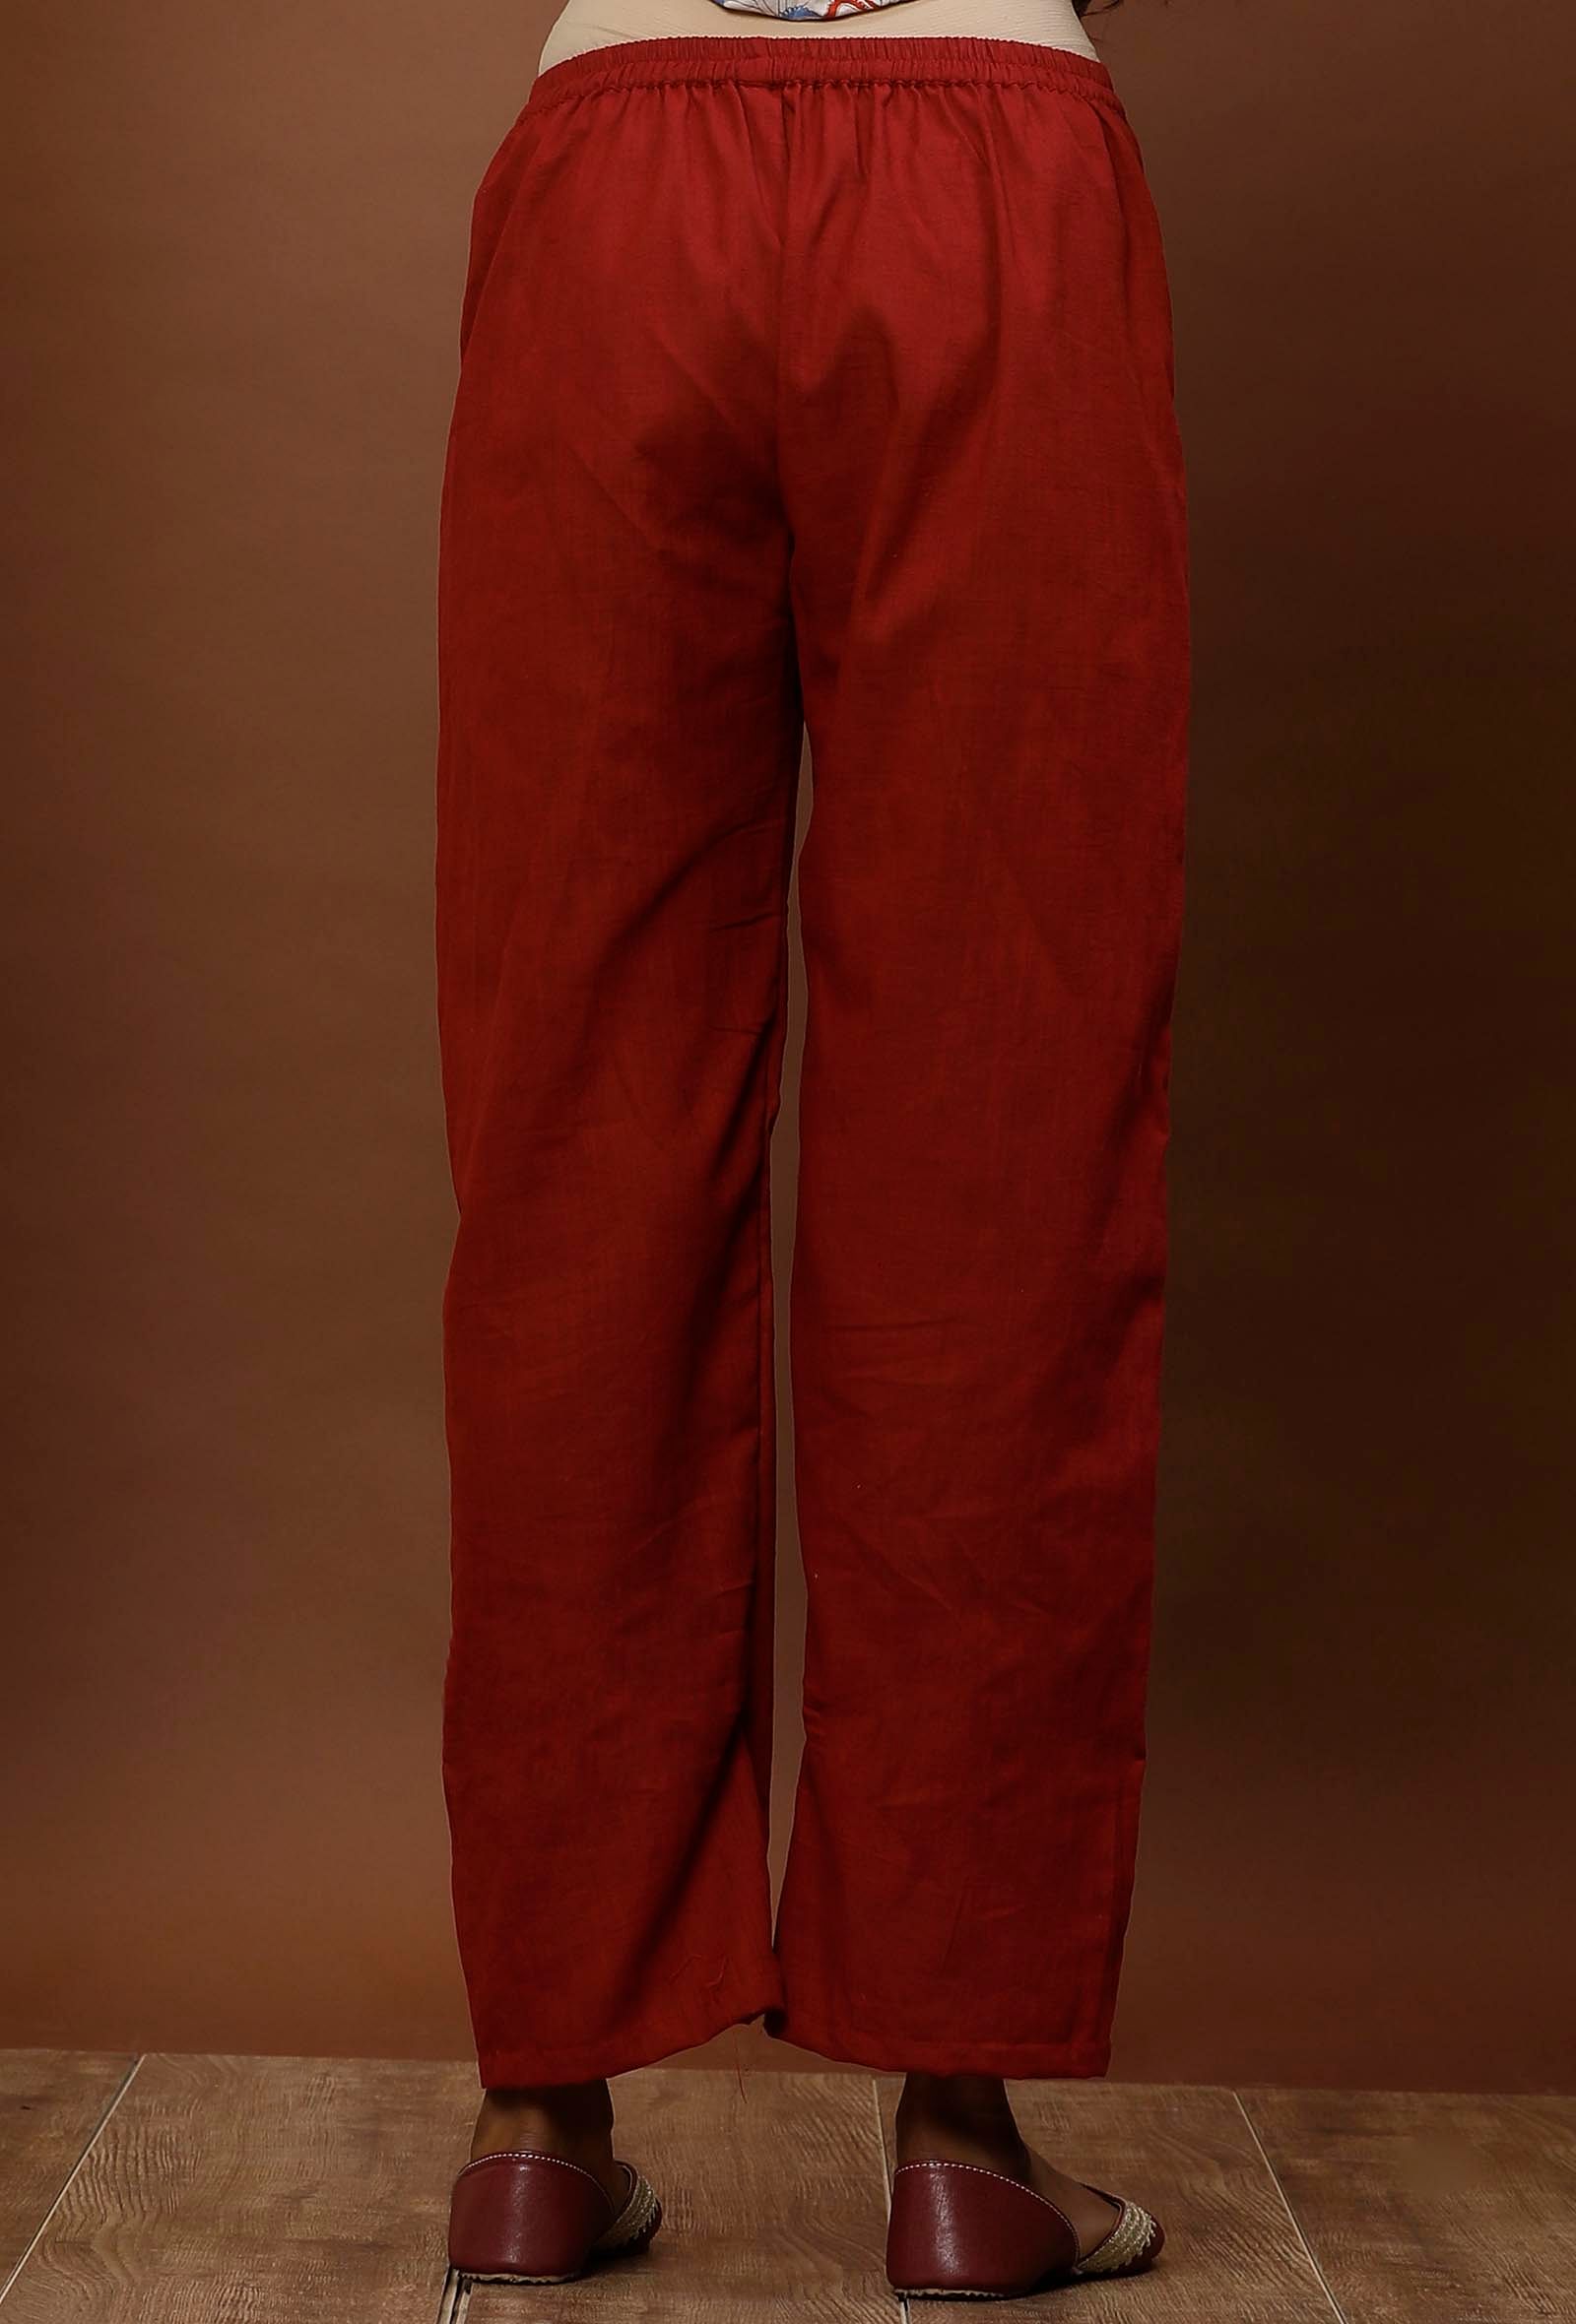 Rust Red Cotton Straight Pants